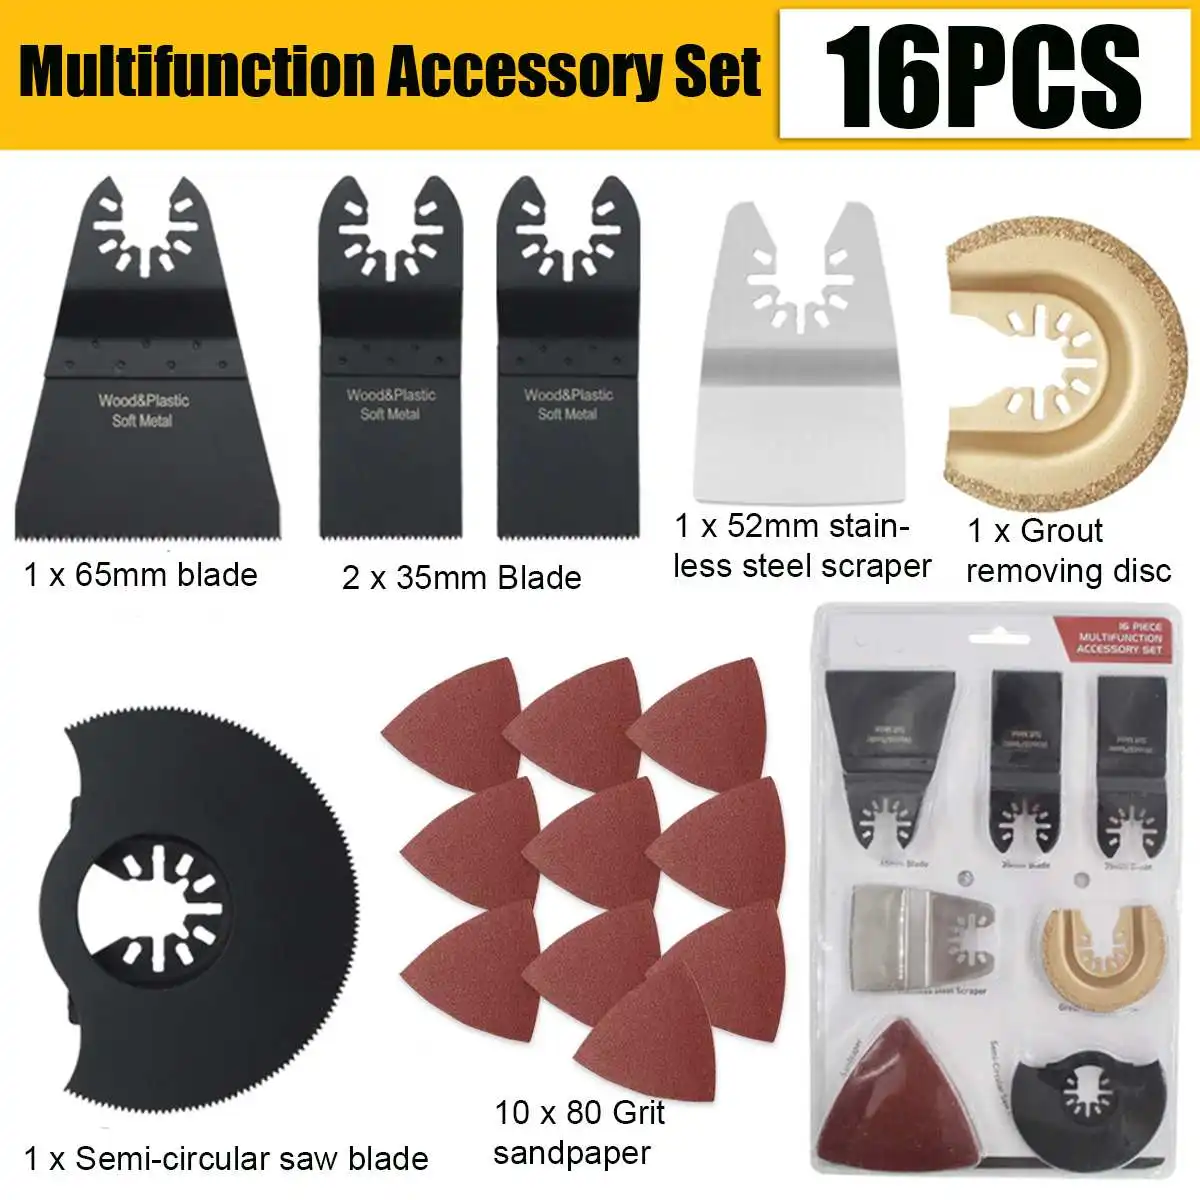 66pc Oscillating Tool Multi-function tool saw blades for wood/metal/plastic/tail 